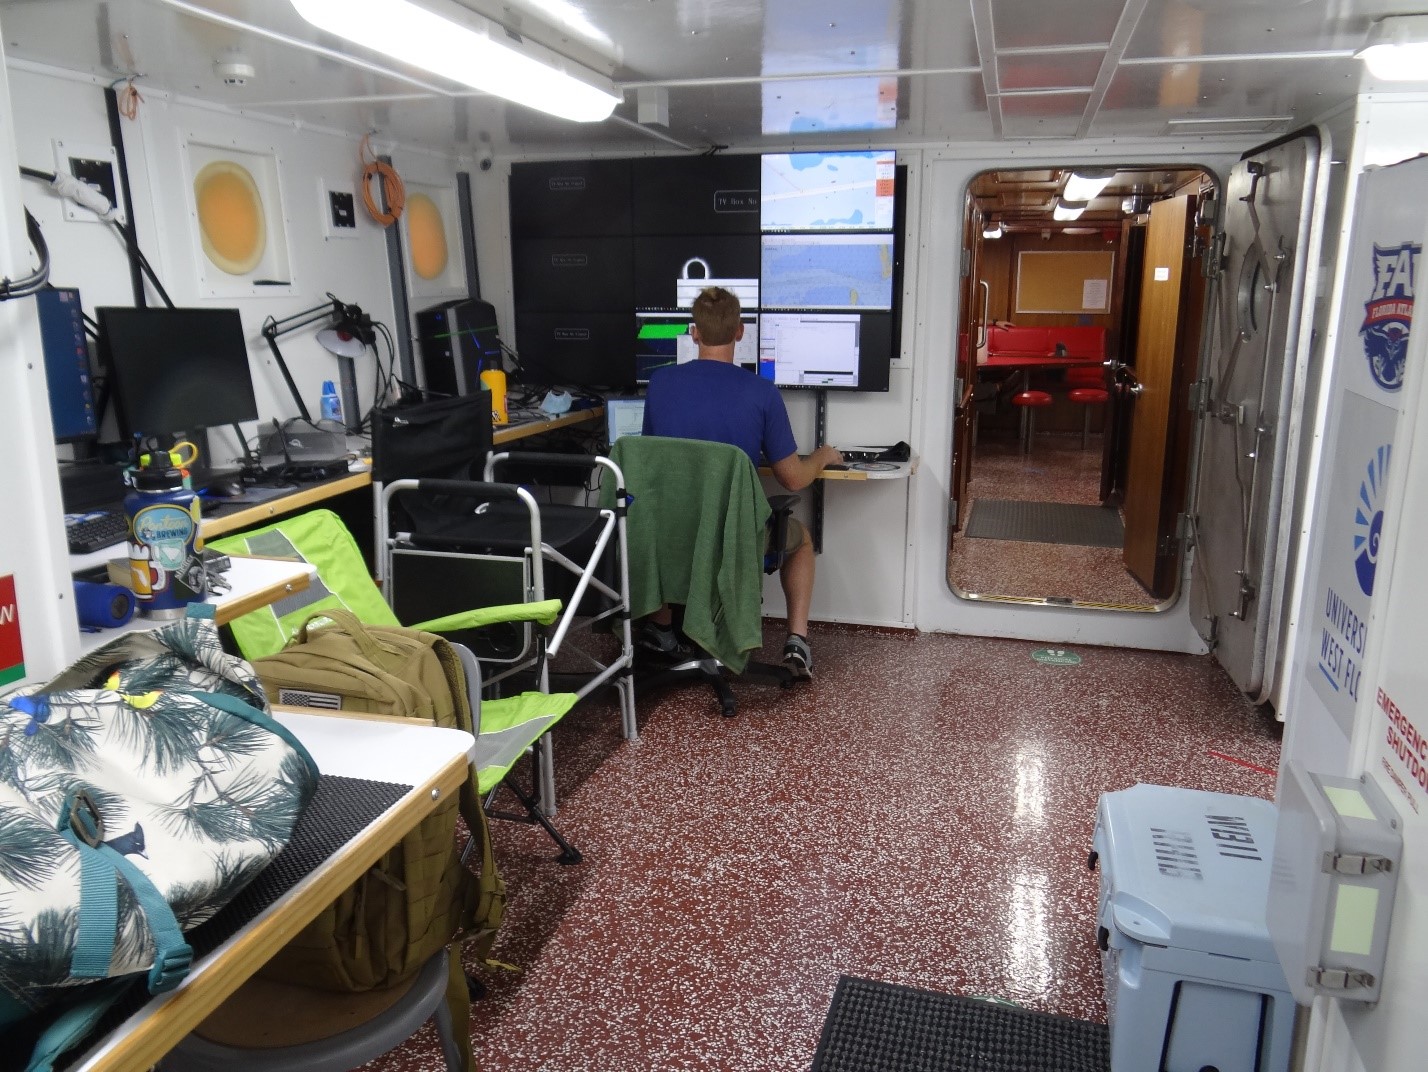 Above: Matthew Hommeyer, COMIT’s Technical Operations Manager, prepares the multibeam echosounder system to collect bathymetry data in the lab aboard the R/V W.T. Hogarth.  